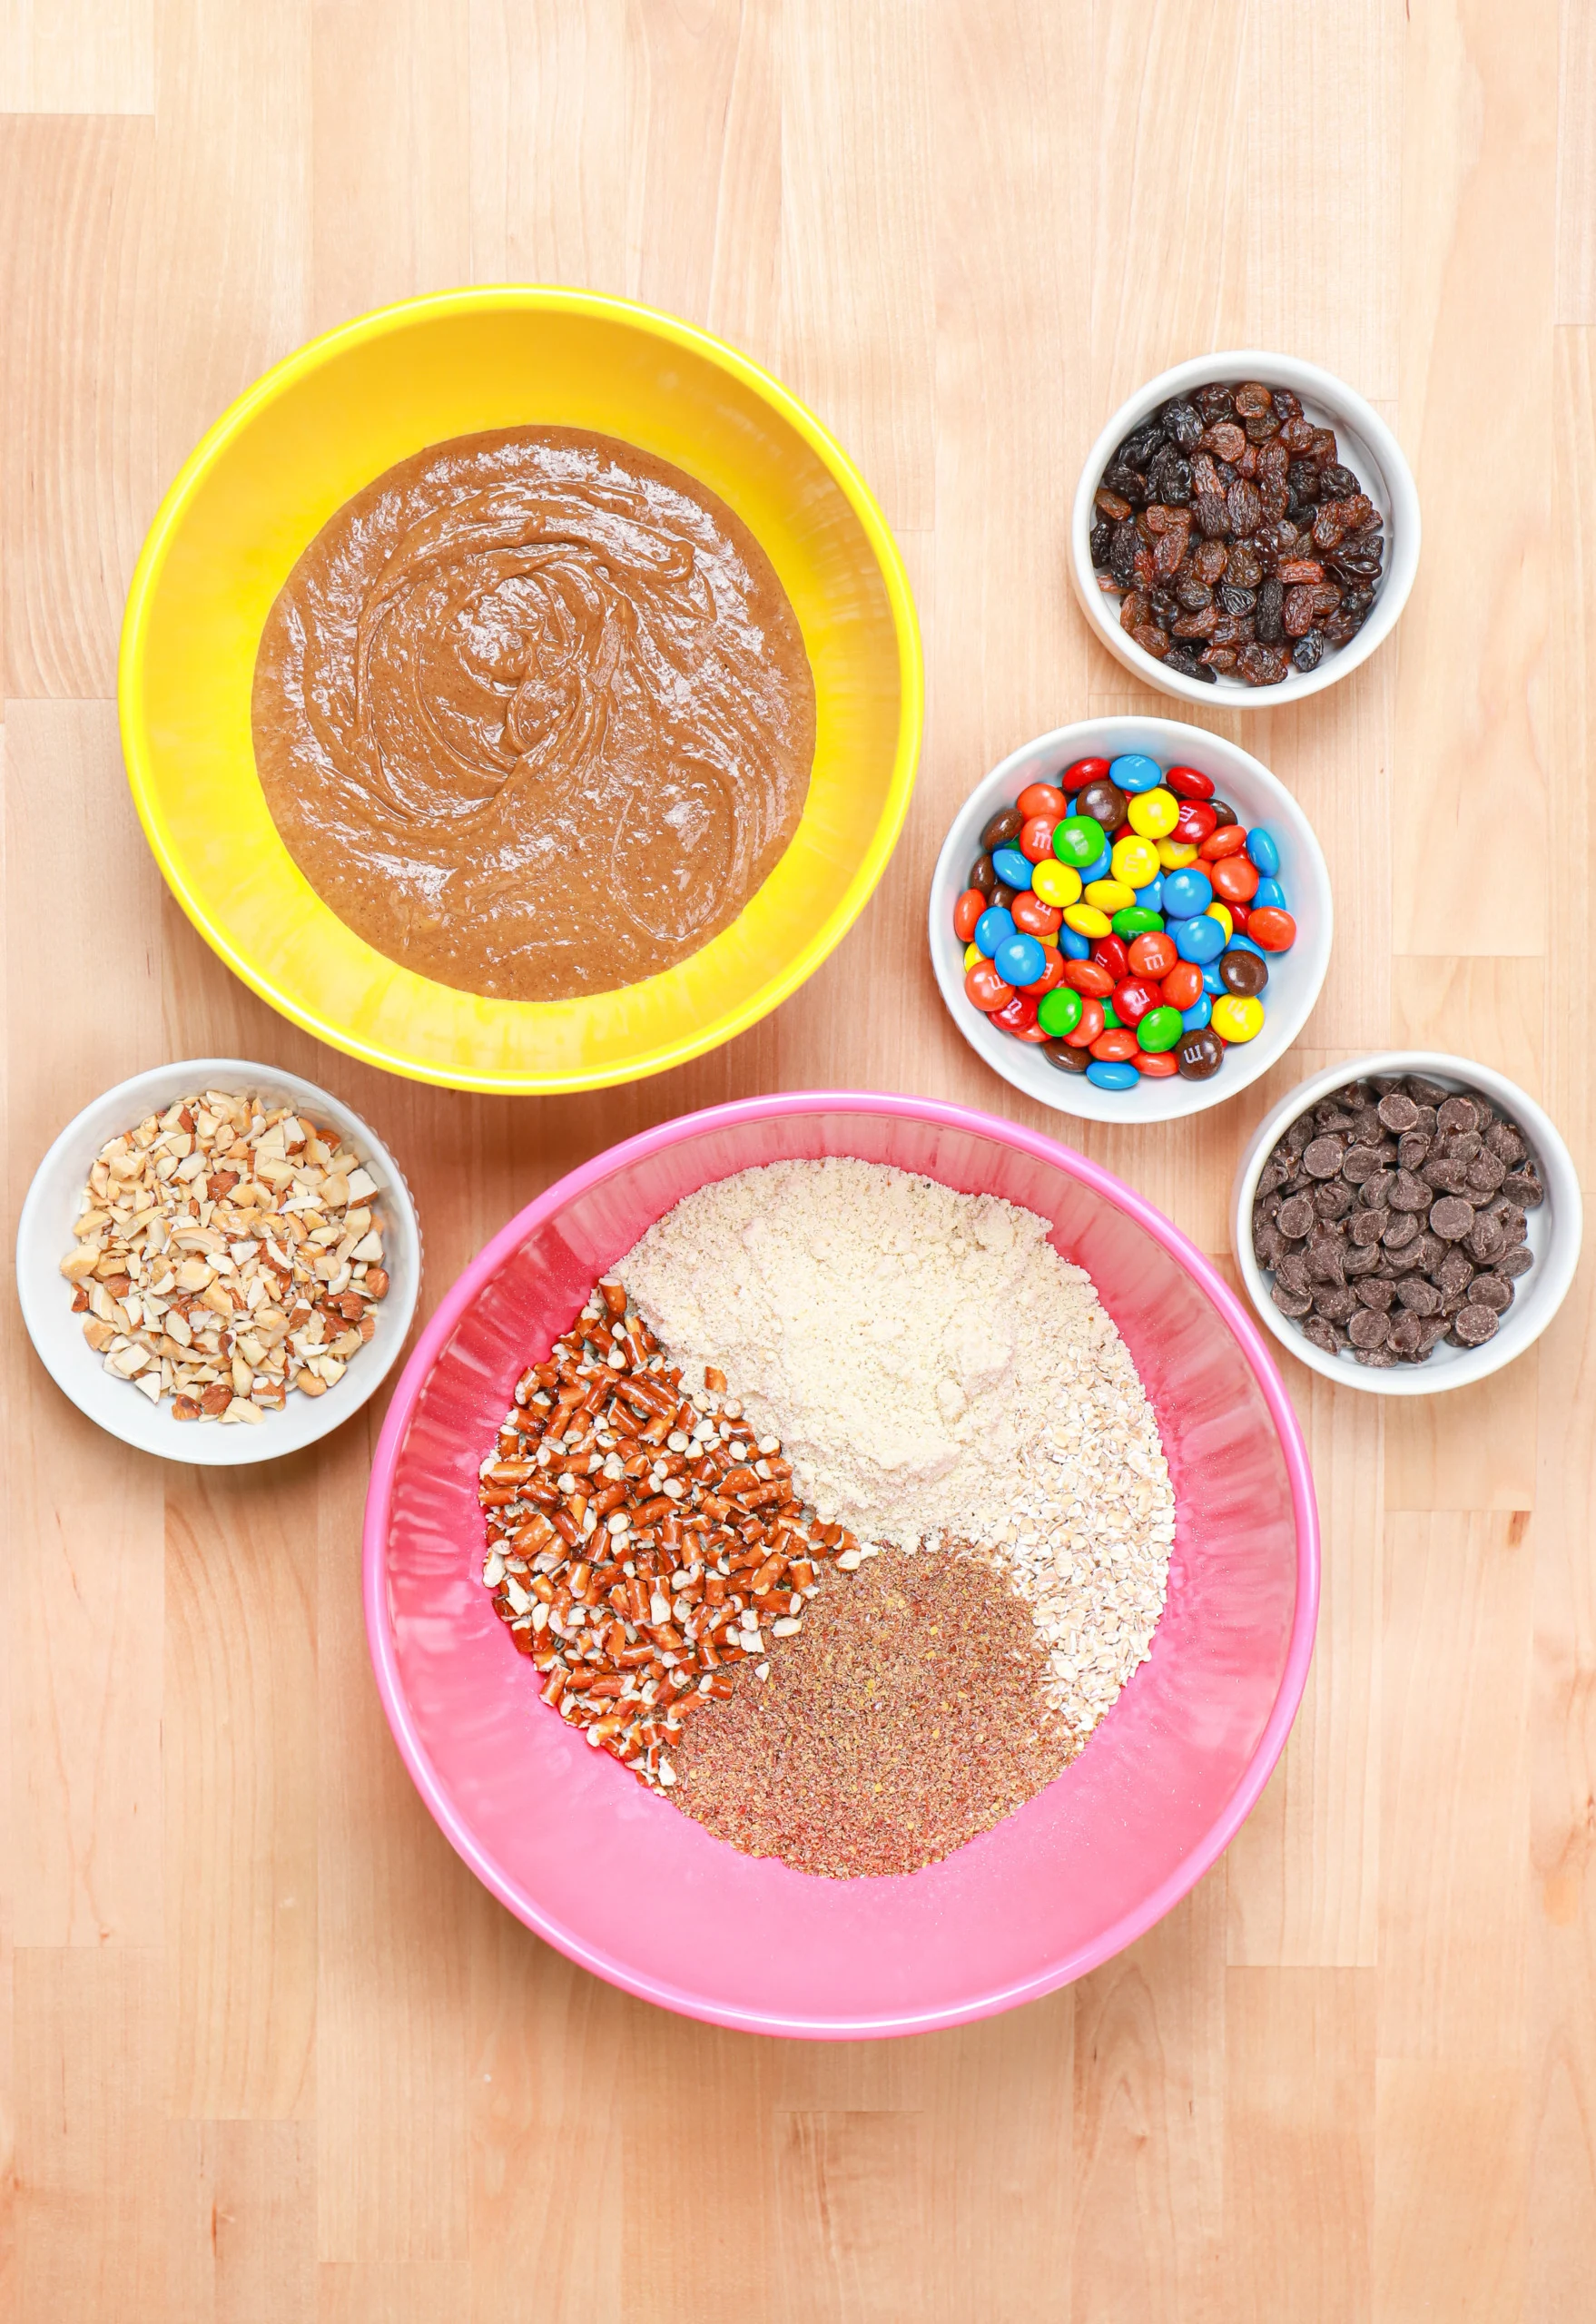 Overhead view of the ingredients for almond butter trail mix bites in various size bowls.